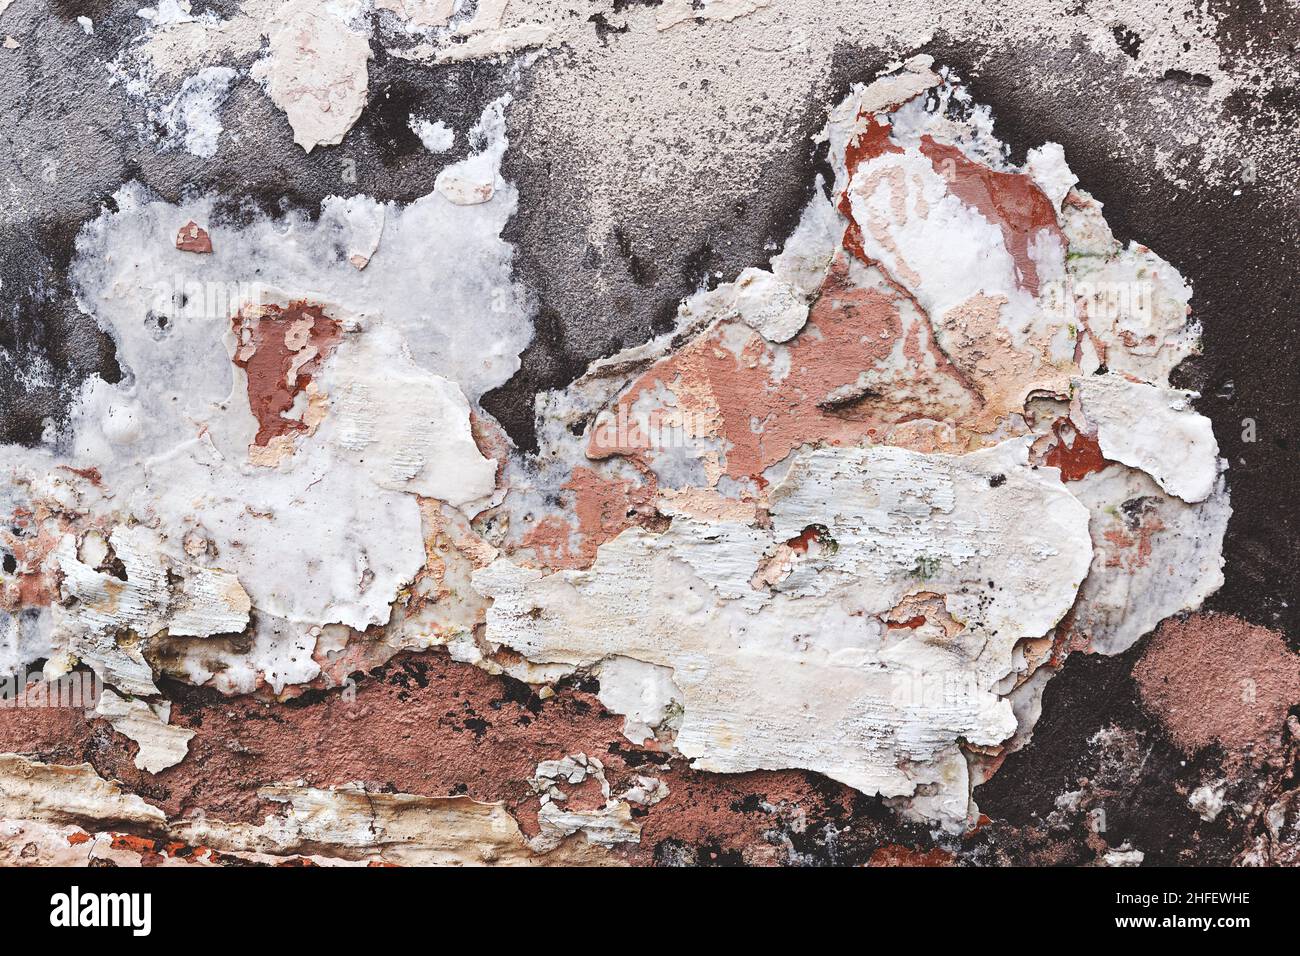 Concrete, weathered, worn, damaged wall paint. Rough, concrete surface with cracks and scratches. Great background or texture. Stock Photo